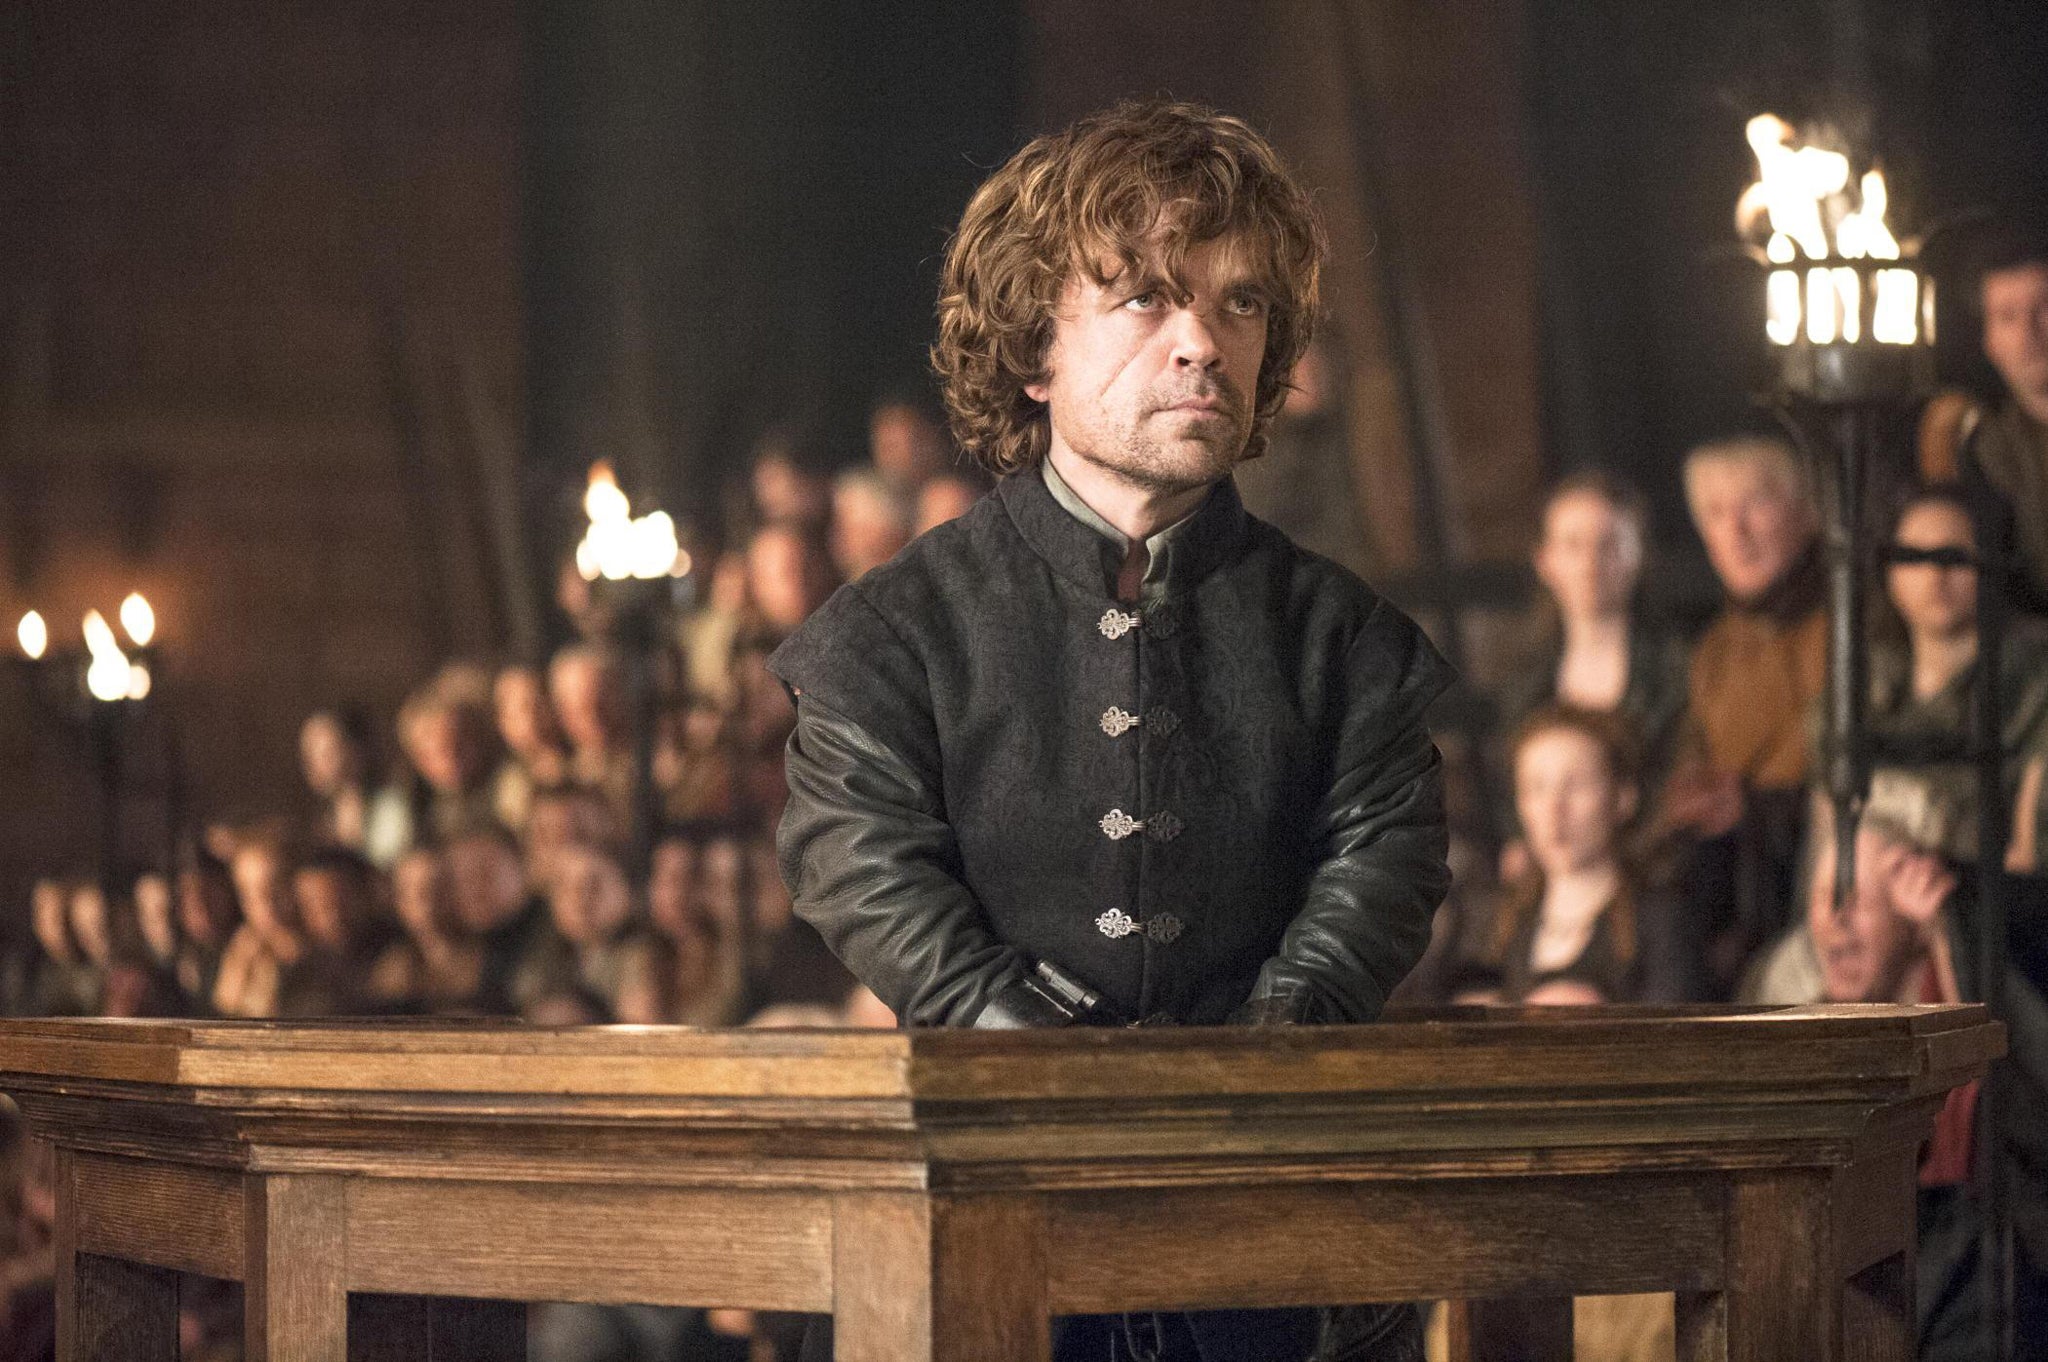 Tyrion in the dock as he tries to defend his name